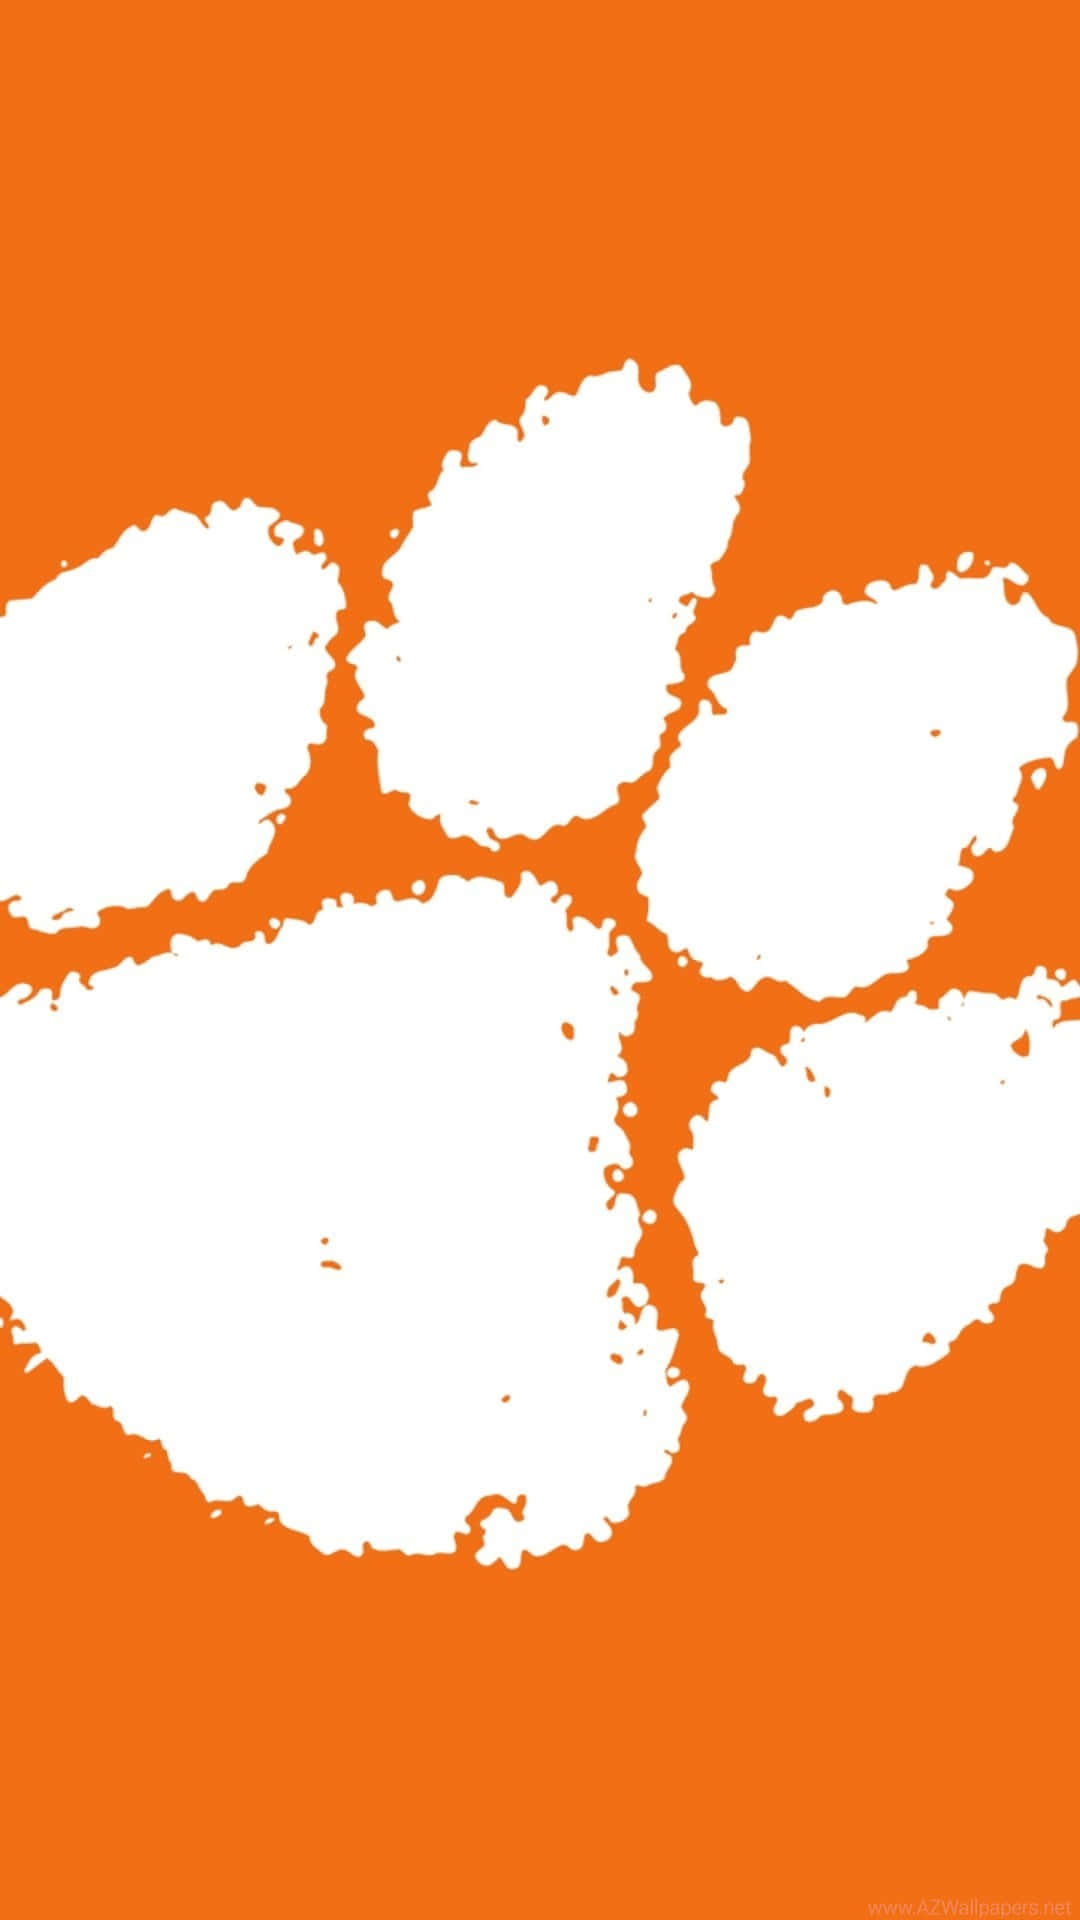 Get the latest Clemson gear for your iPhone Wallpaper